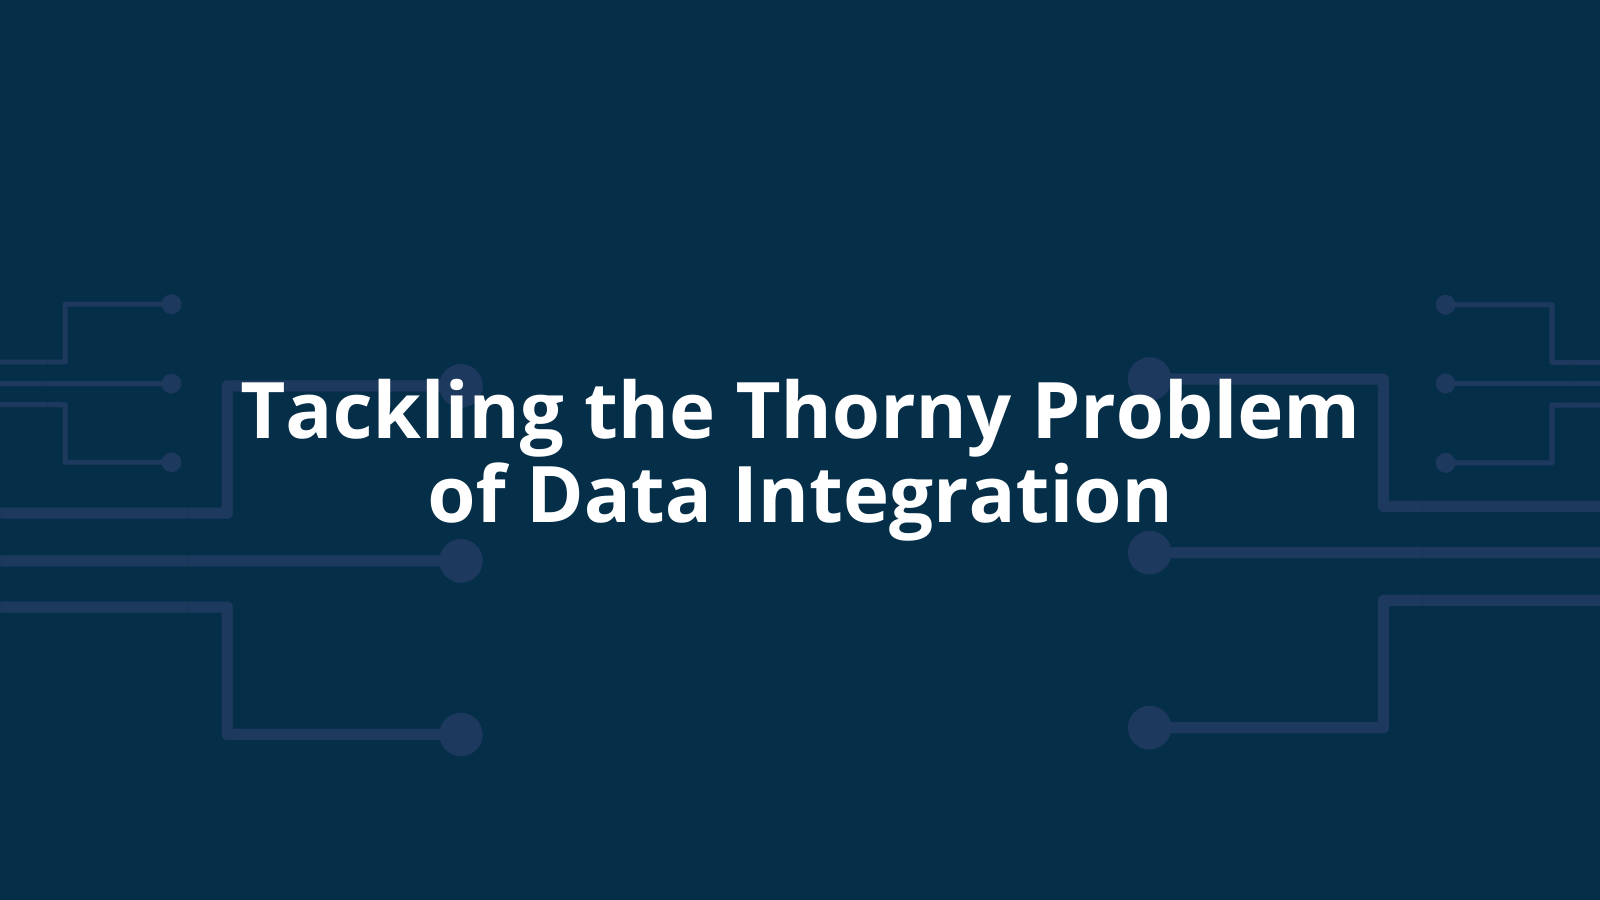 Tackling the Thorny Problem of Data Integration